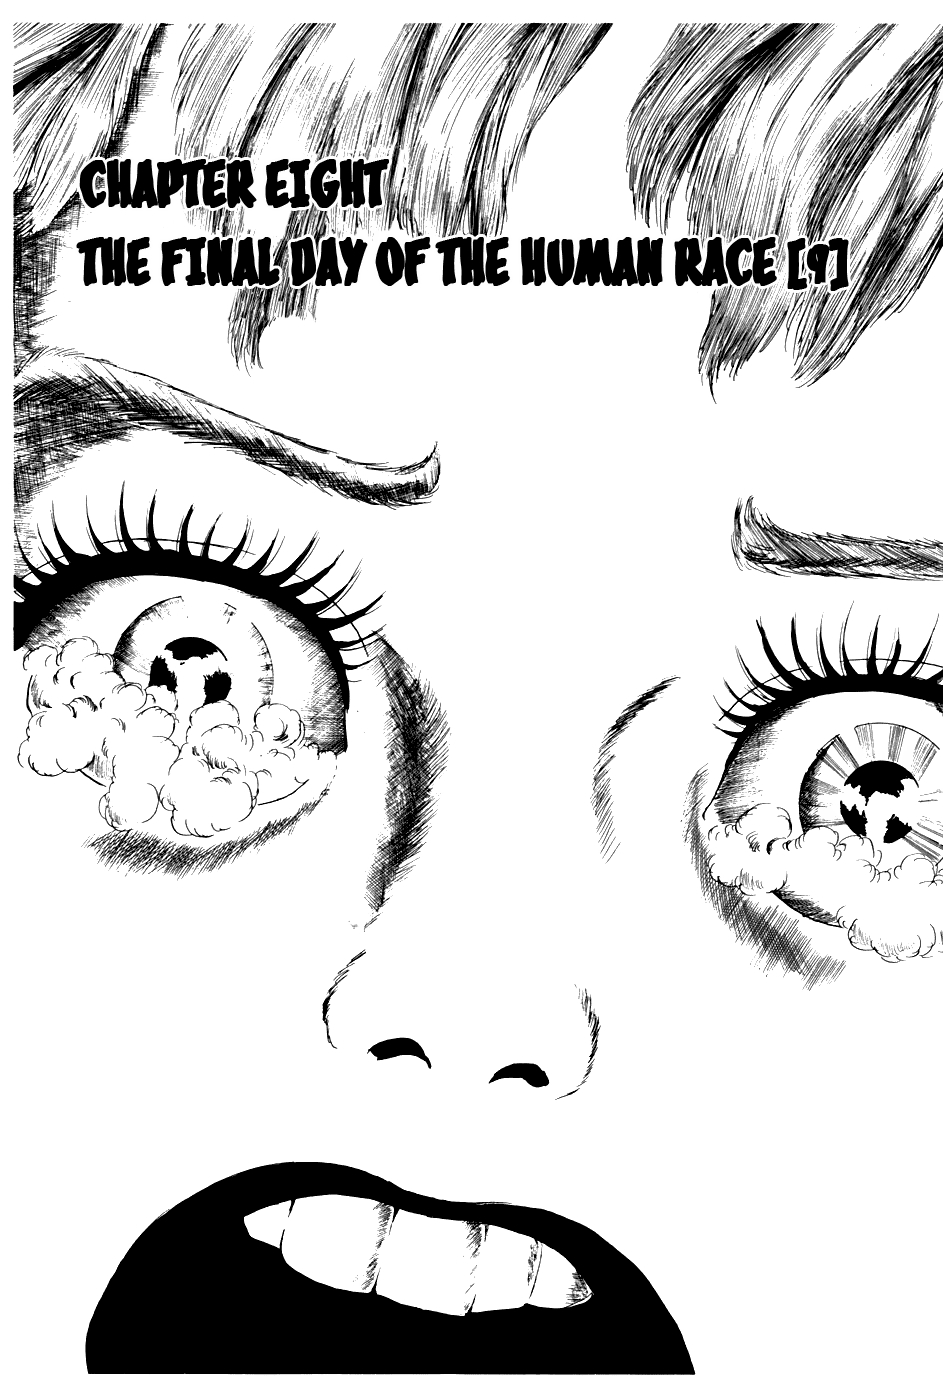 Fourteen Vol. 12 Ch. 224 The Final Day of the Human Race (9)